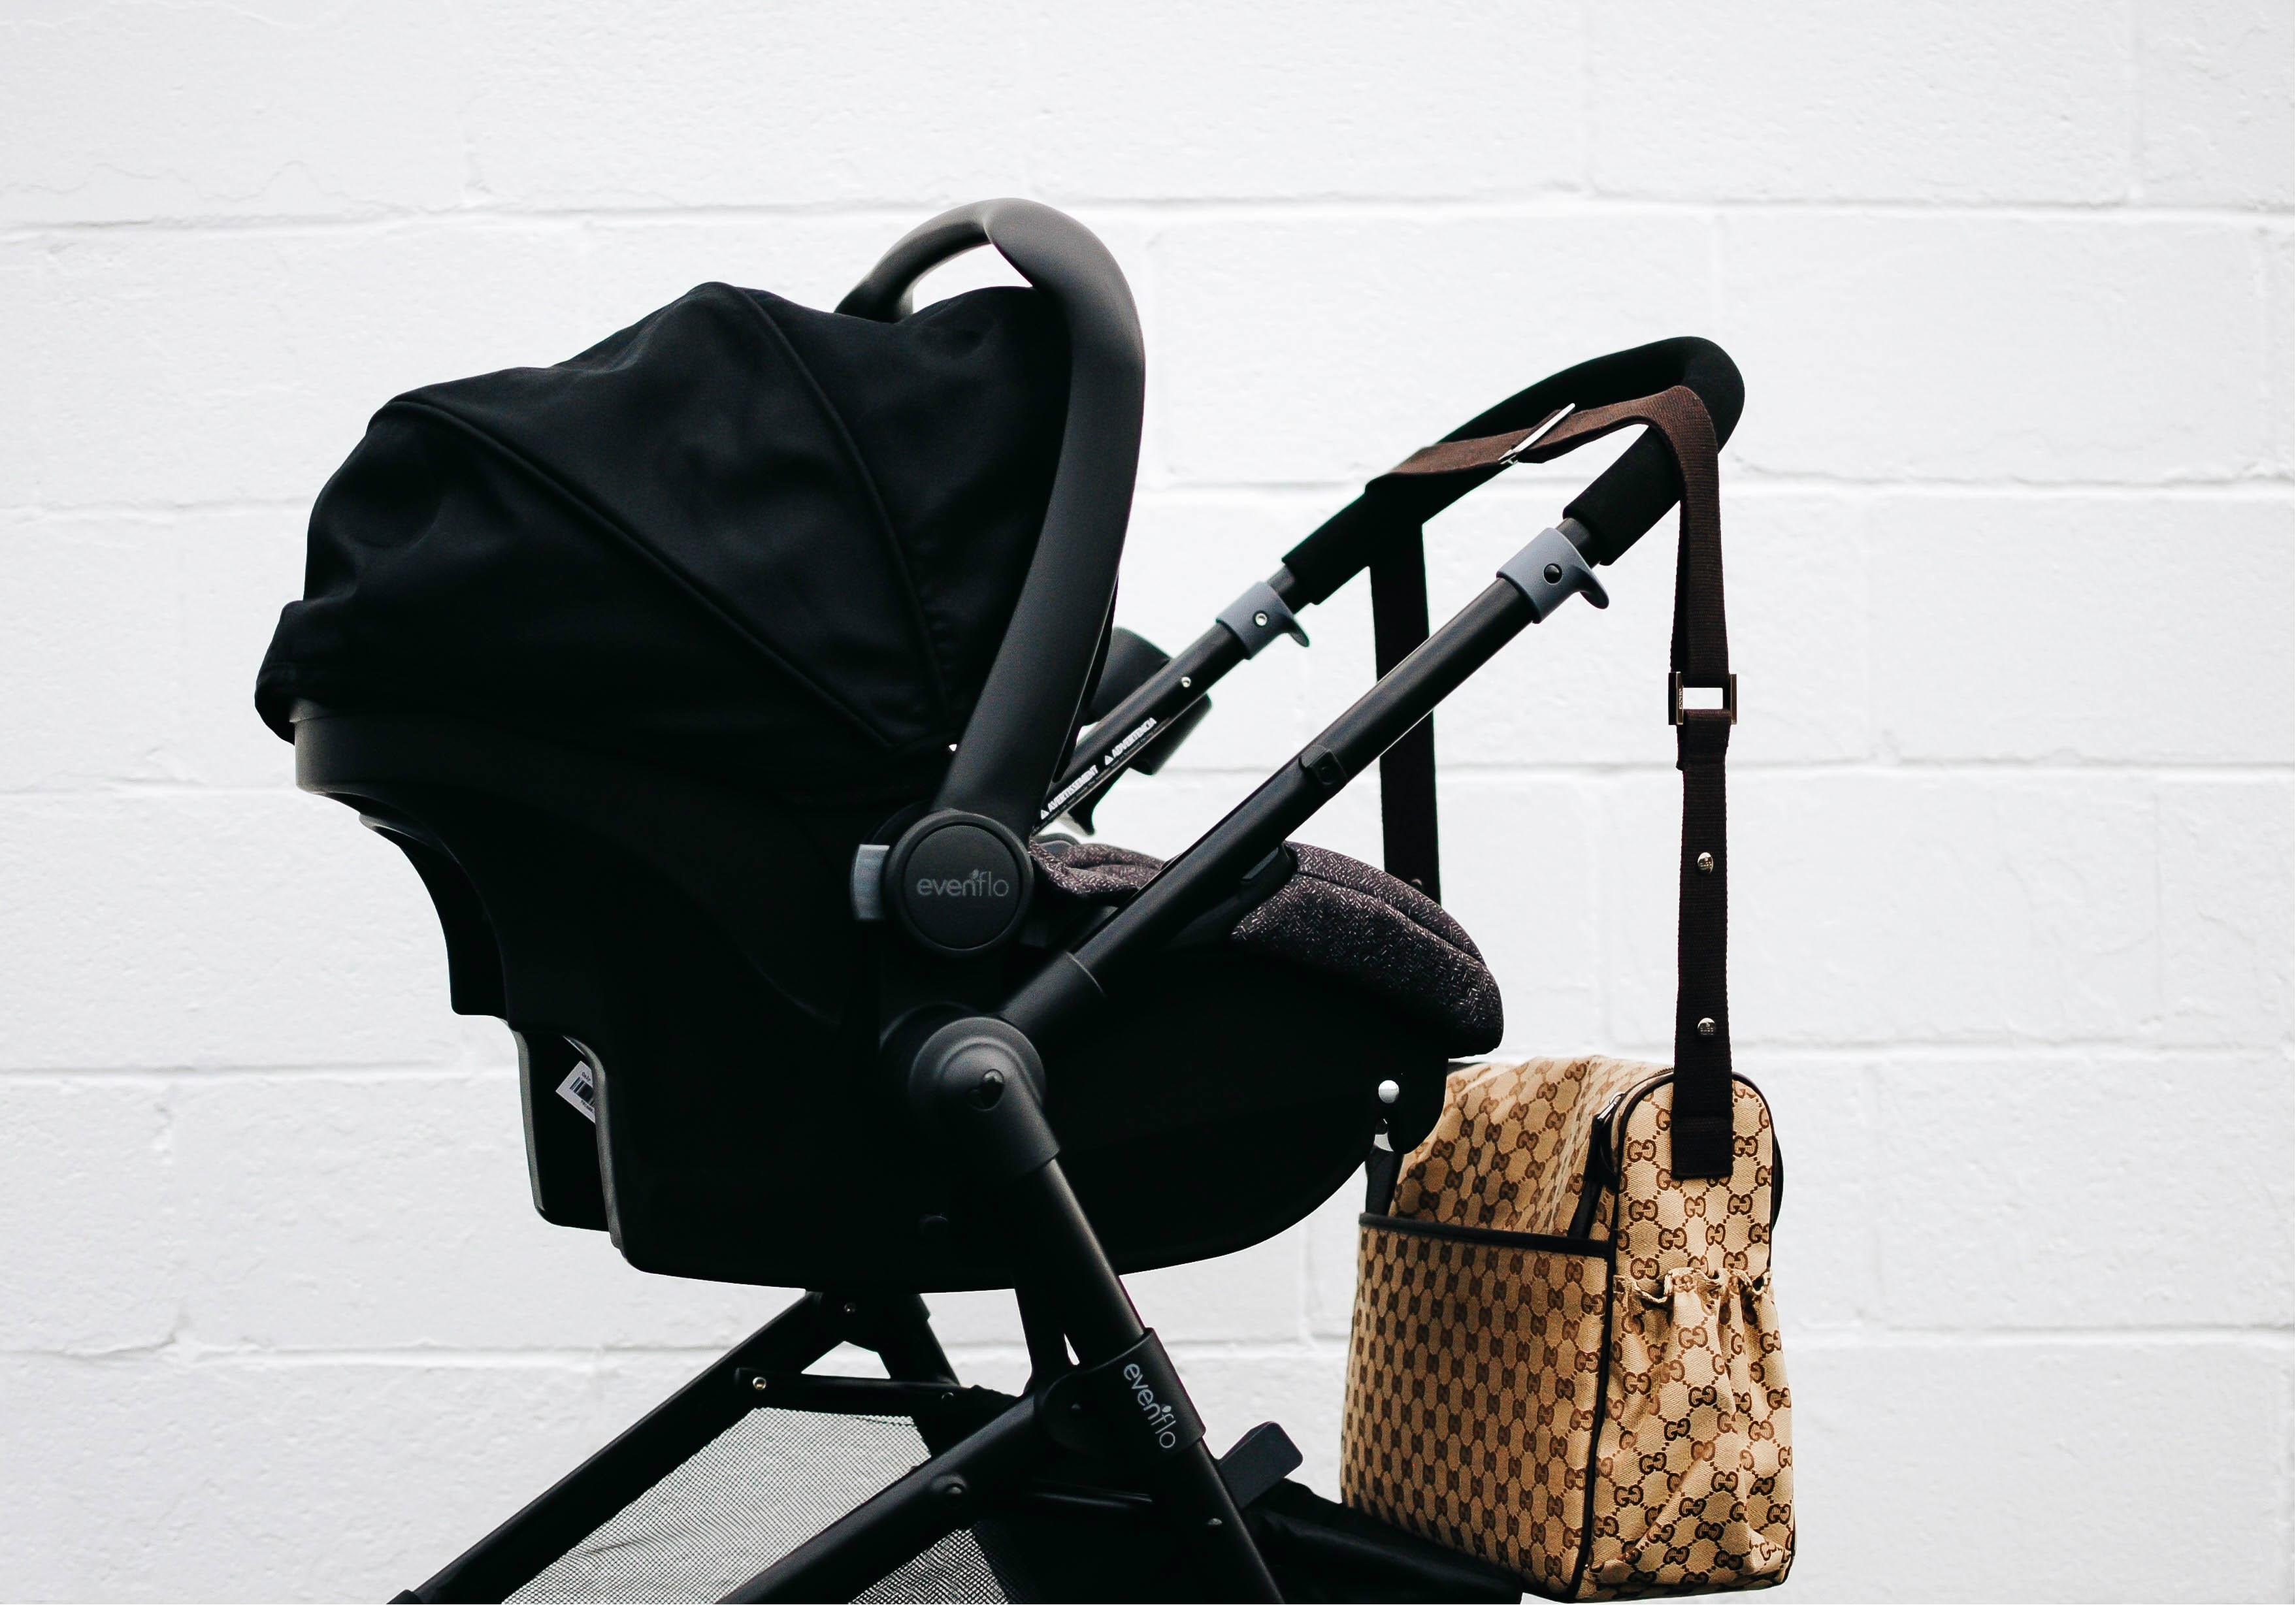 Vanessa Lambert blogger behind What Would V Wear gets ready for baby #2 together with Evenflow_infant stroller_13